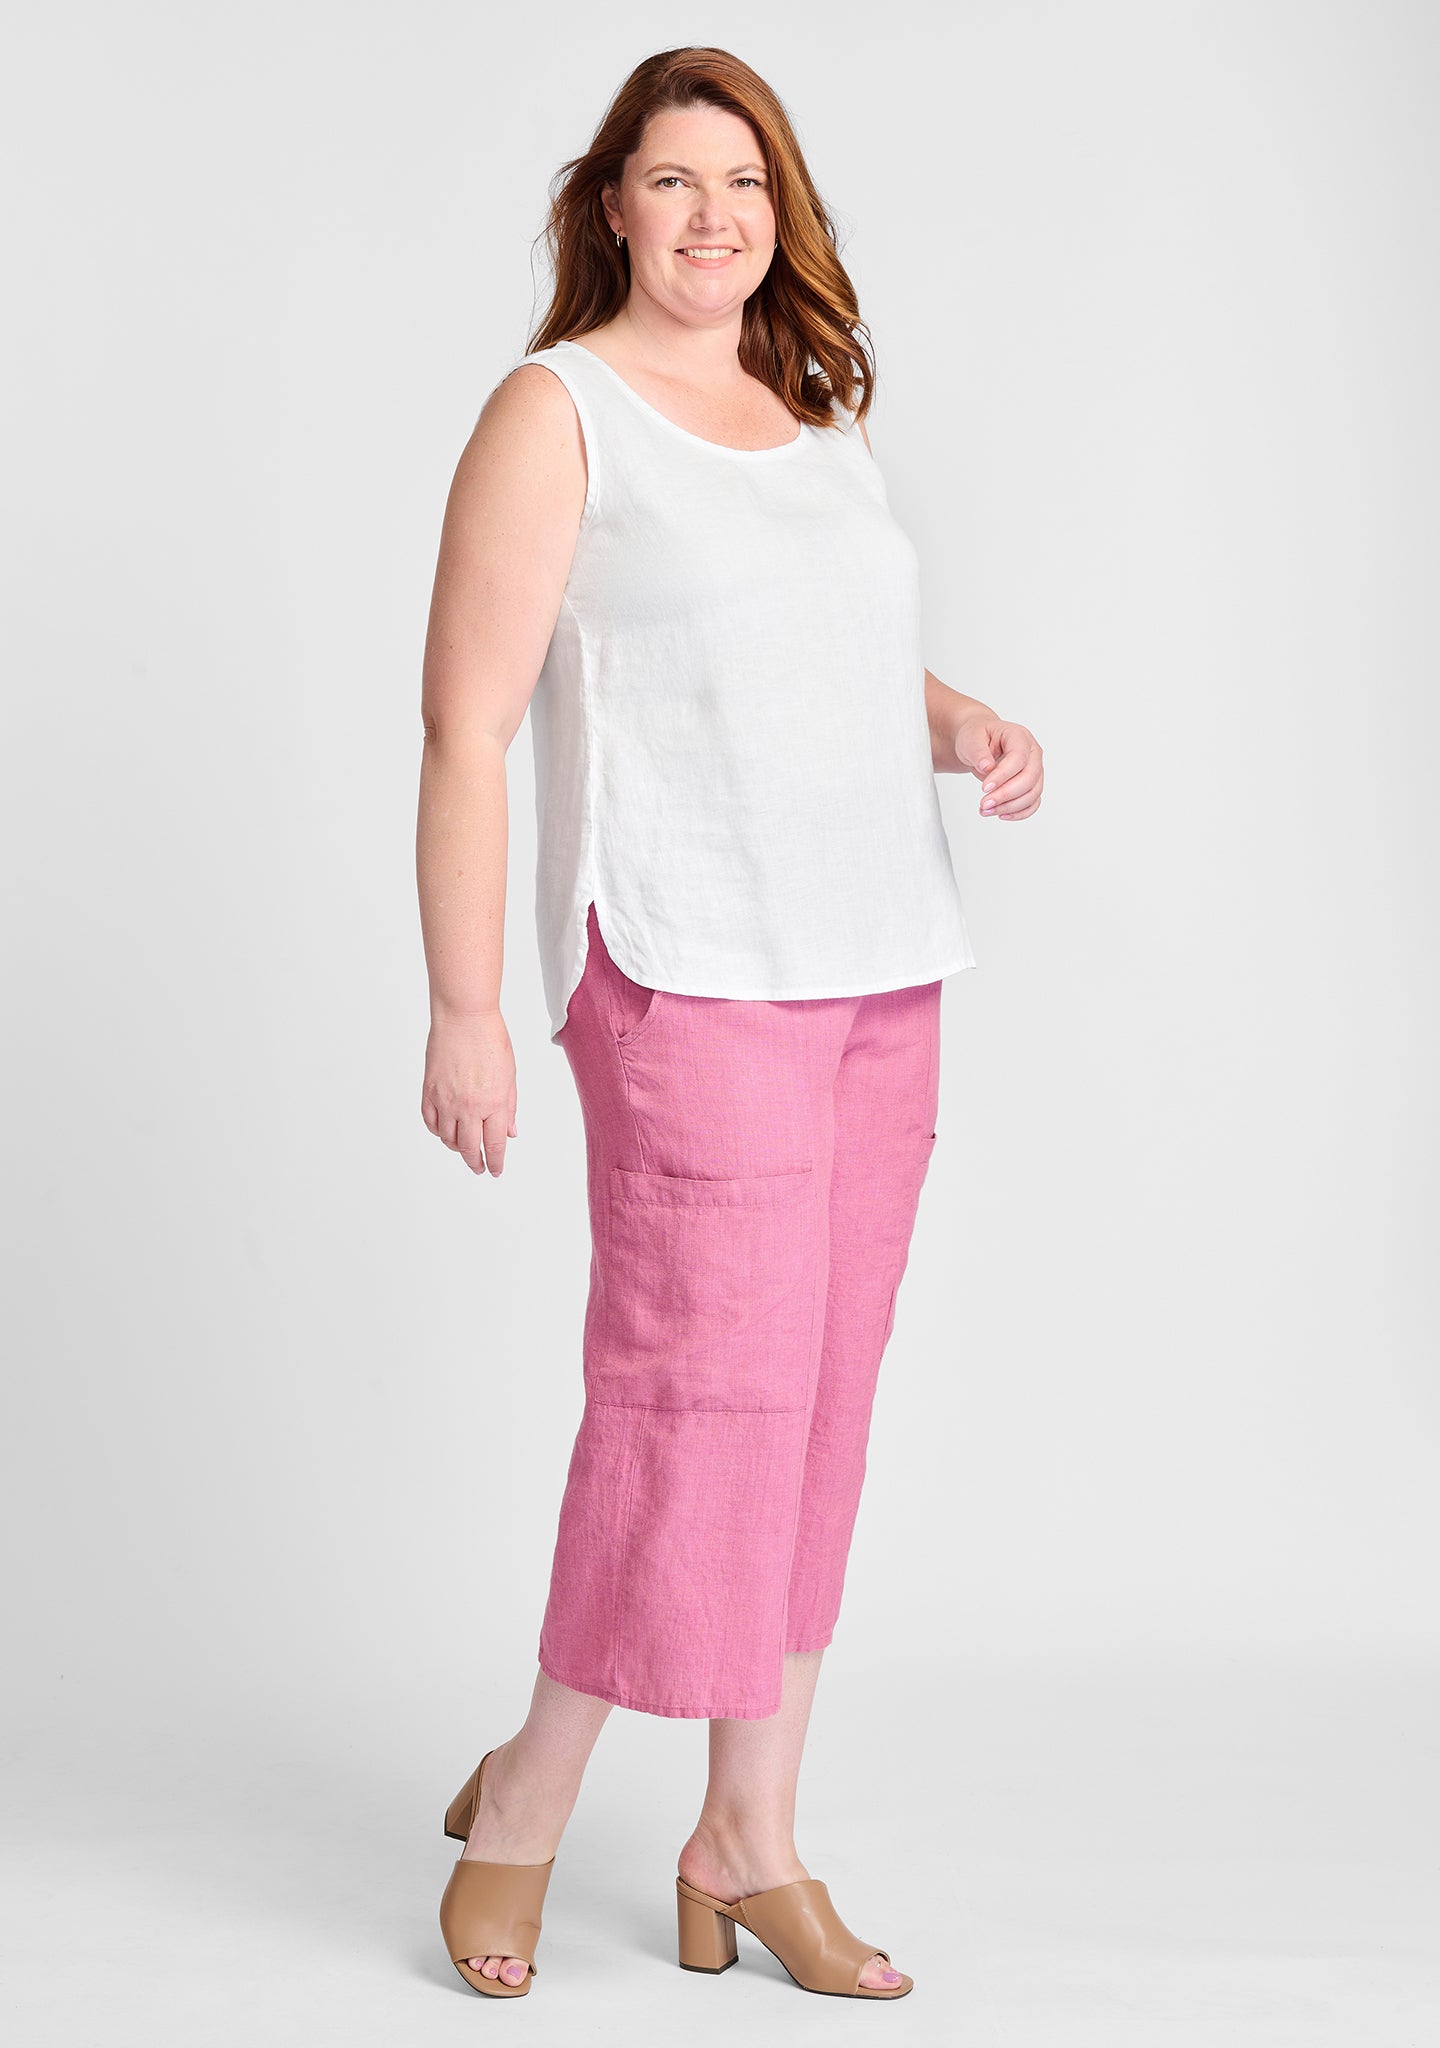 FLAX linen tank in white with linen pants in pink